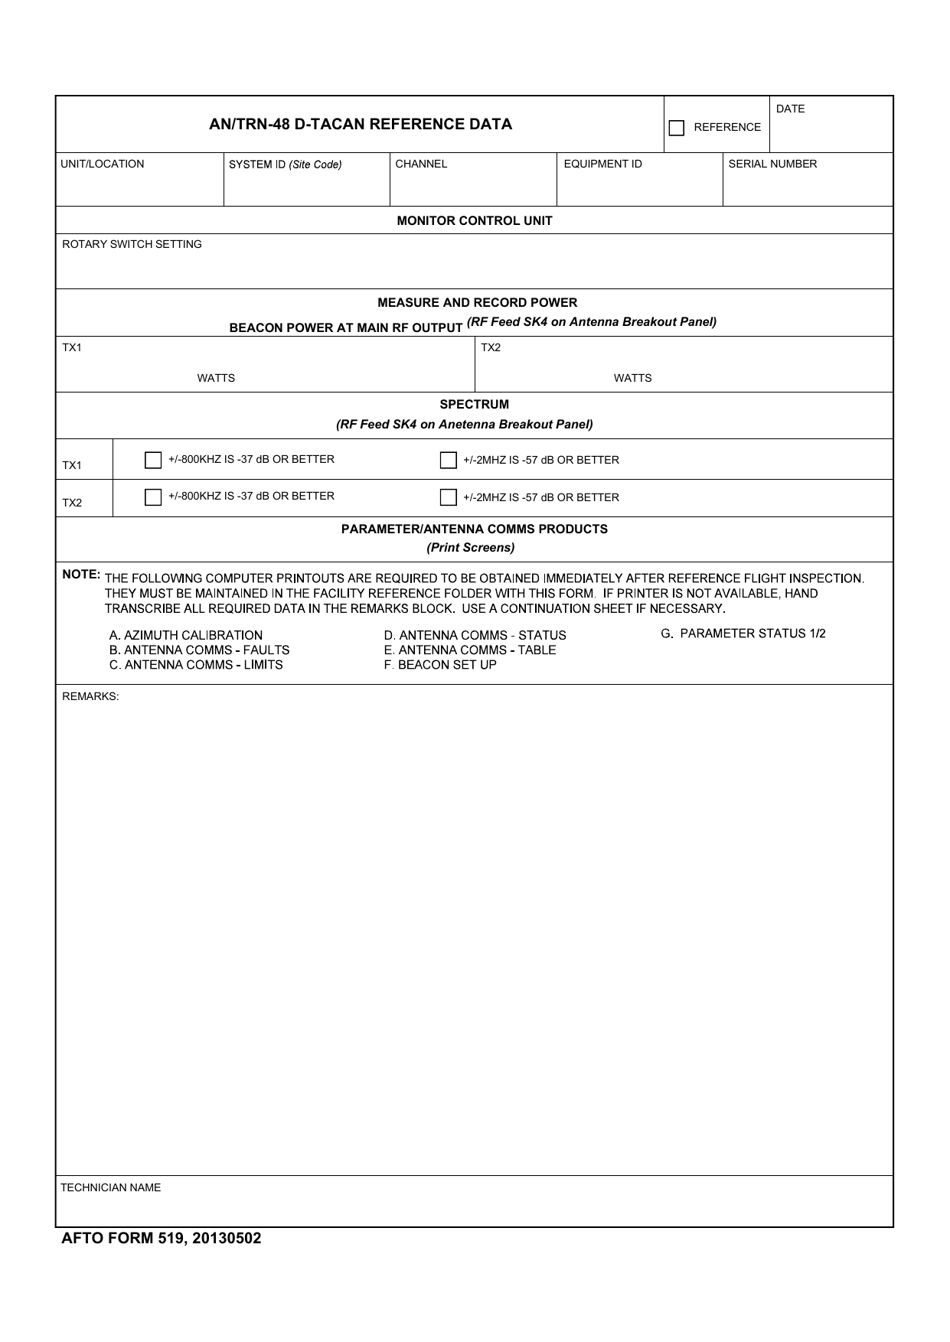 AFTO Form 519 An / Trn-48-d Tacan Reference Data, Page 1